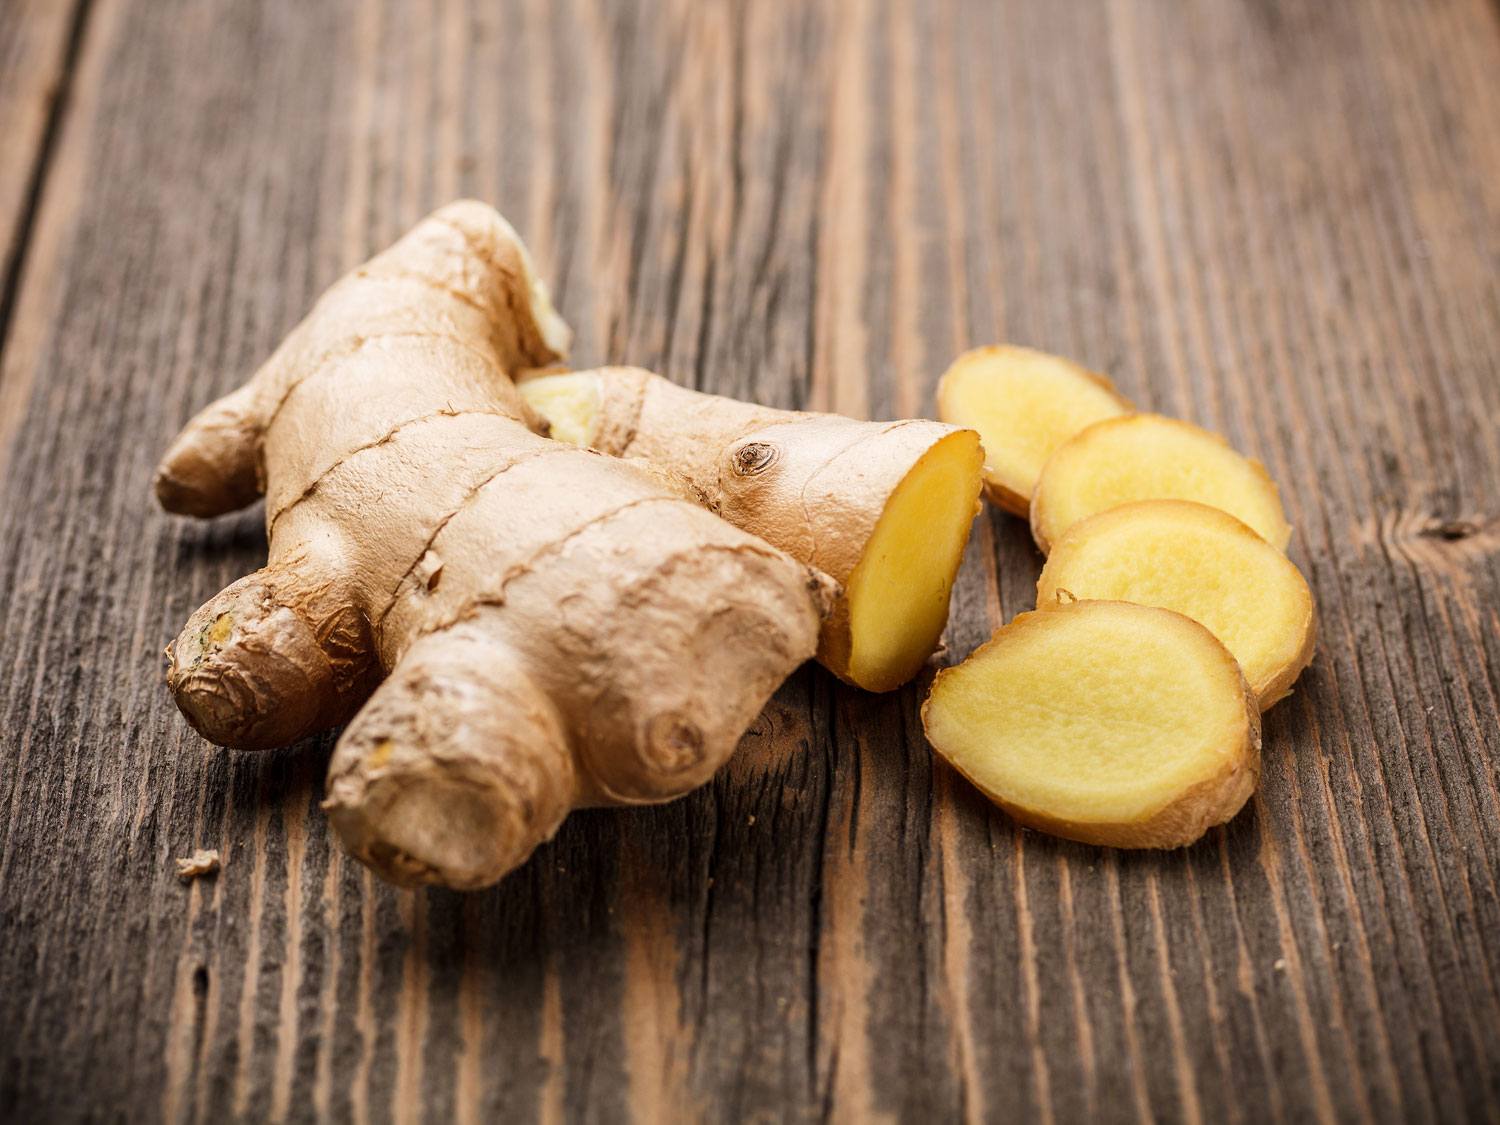 What Ginger Does To Cancer Cells Has Amazed Researchers